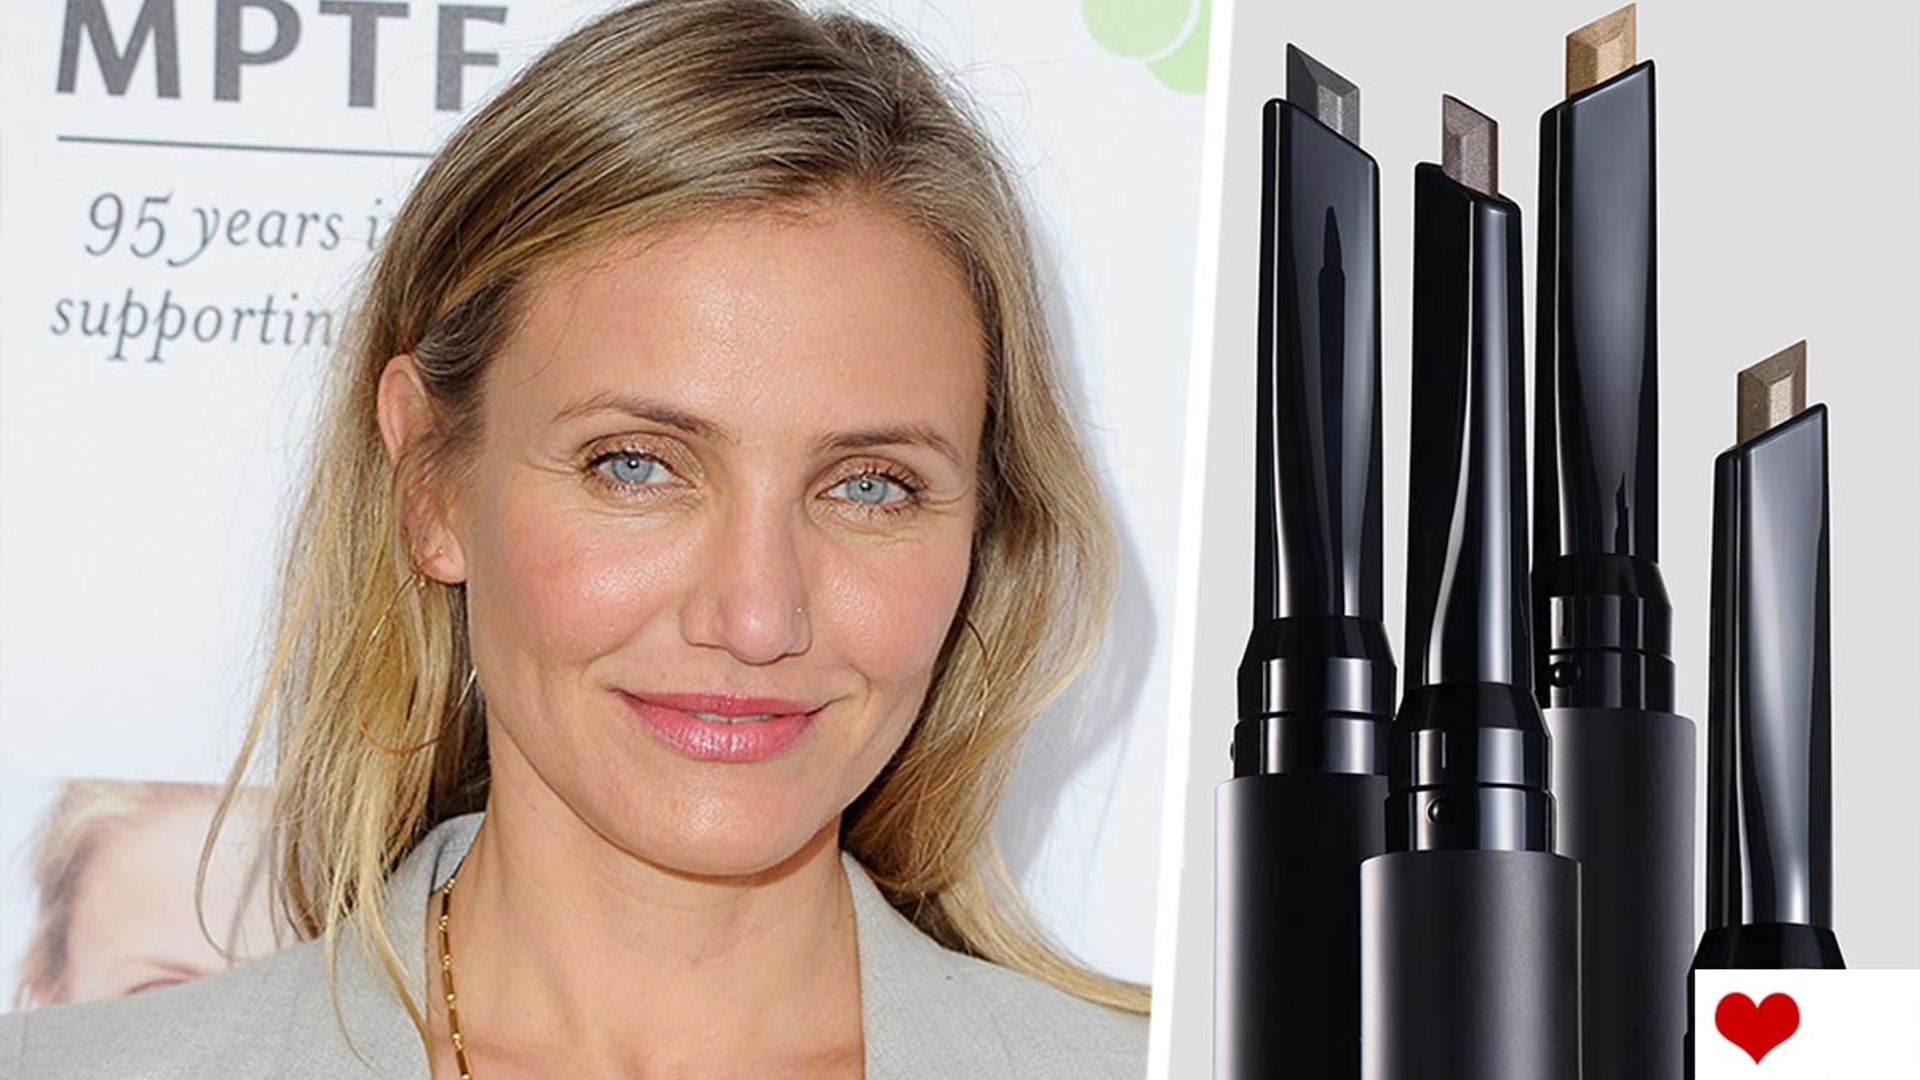 This is Cameron Diaz's makeup artist's secret weapon for natural looking brows